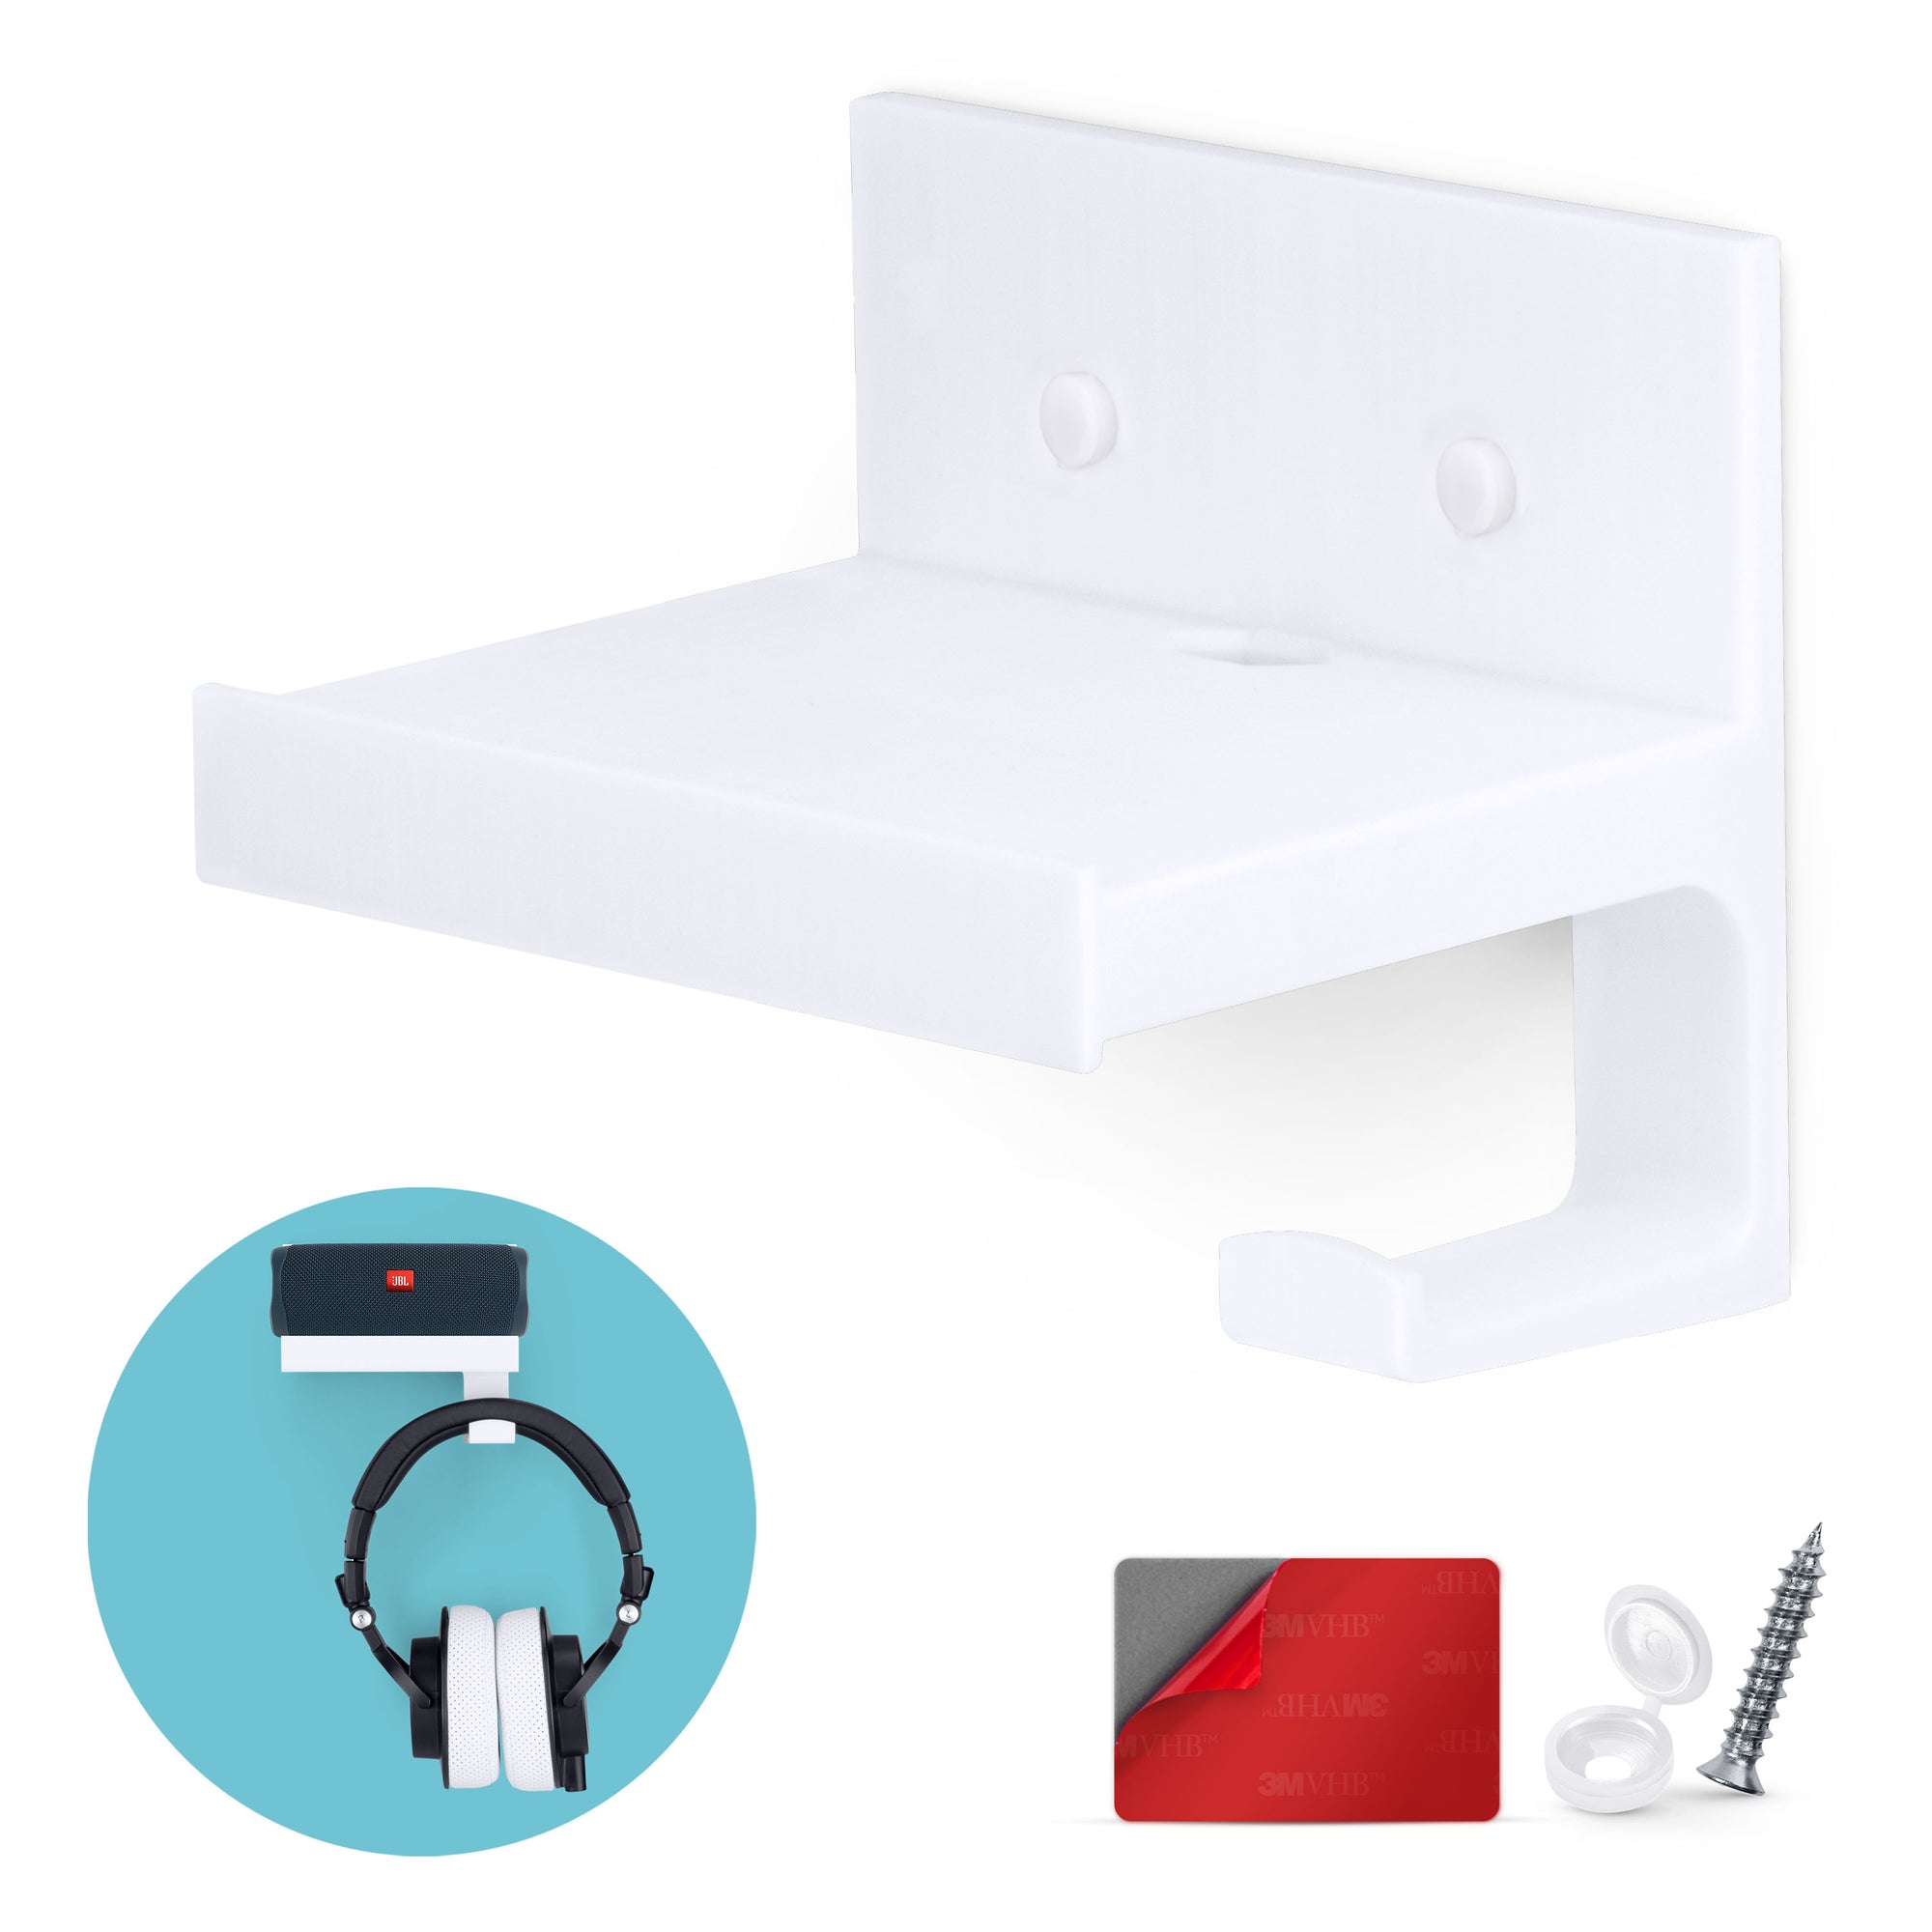 5" Small Floating Shelf With Headphone Hanger, Adhesive & Screw In, For Bluetooth Speakers, Cameras, Plants, Toys & More, Easy to Install (SF2105-HP, White)